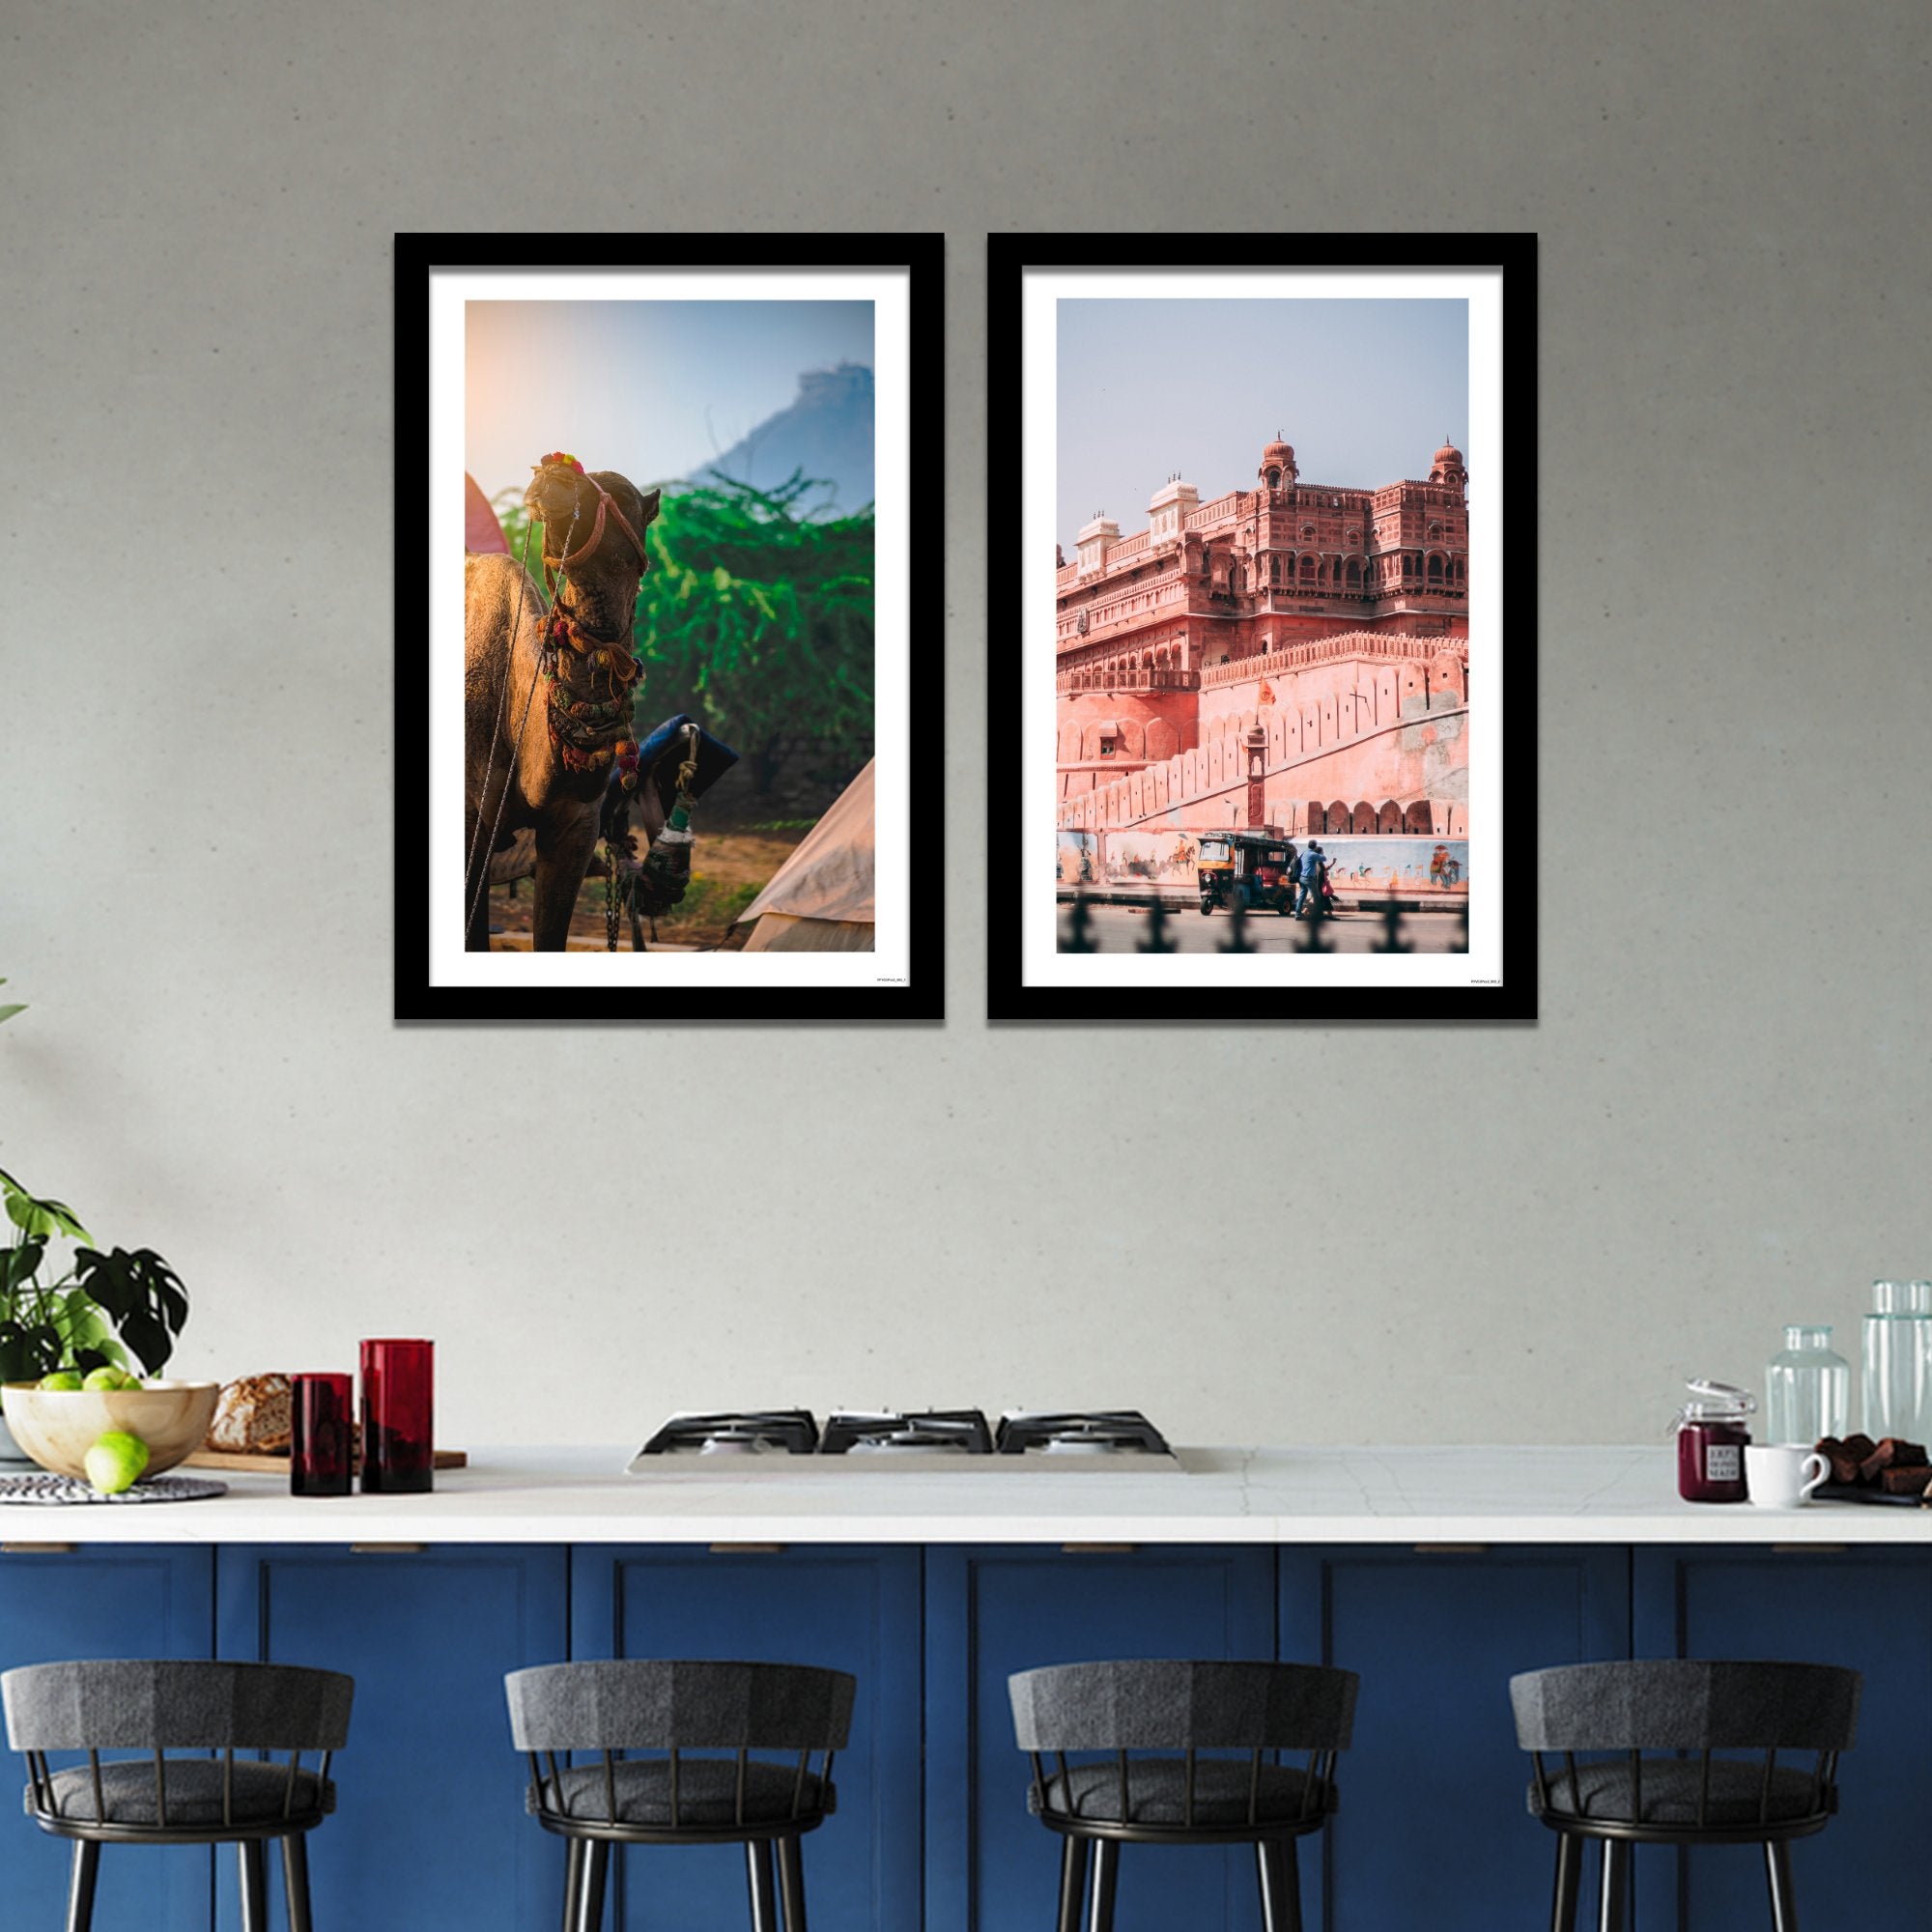 Junagarh Fort and Camel of Rajasthan Quality Frame Painting of 2 Pieces